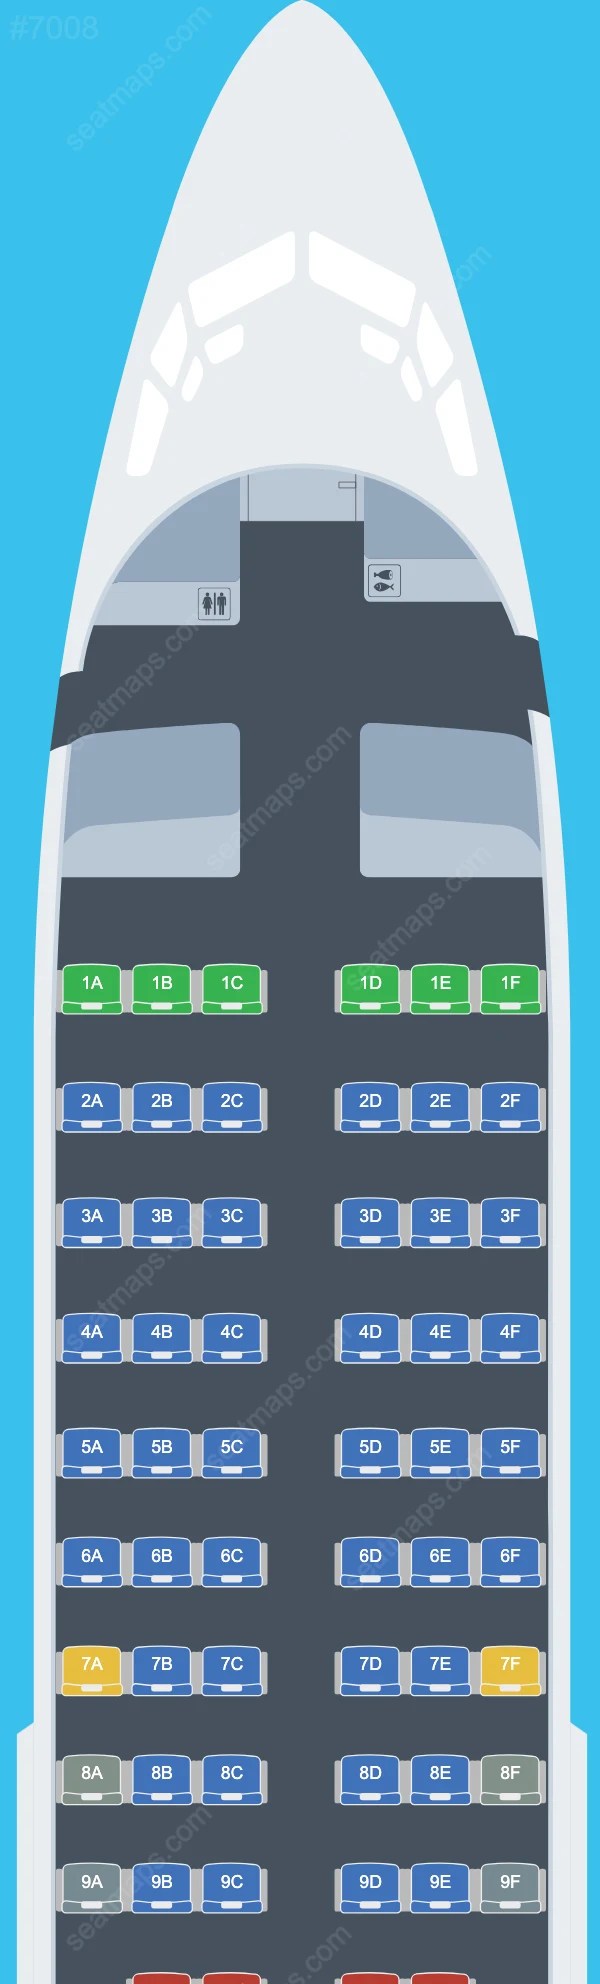 Lucky Air Boeing 737 Seat Maps 737-700 V.4